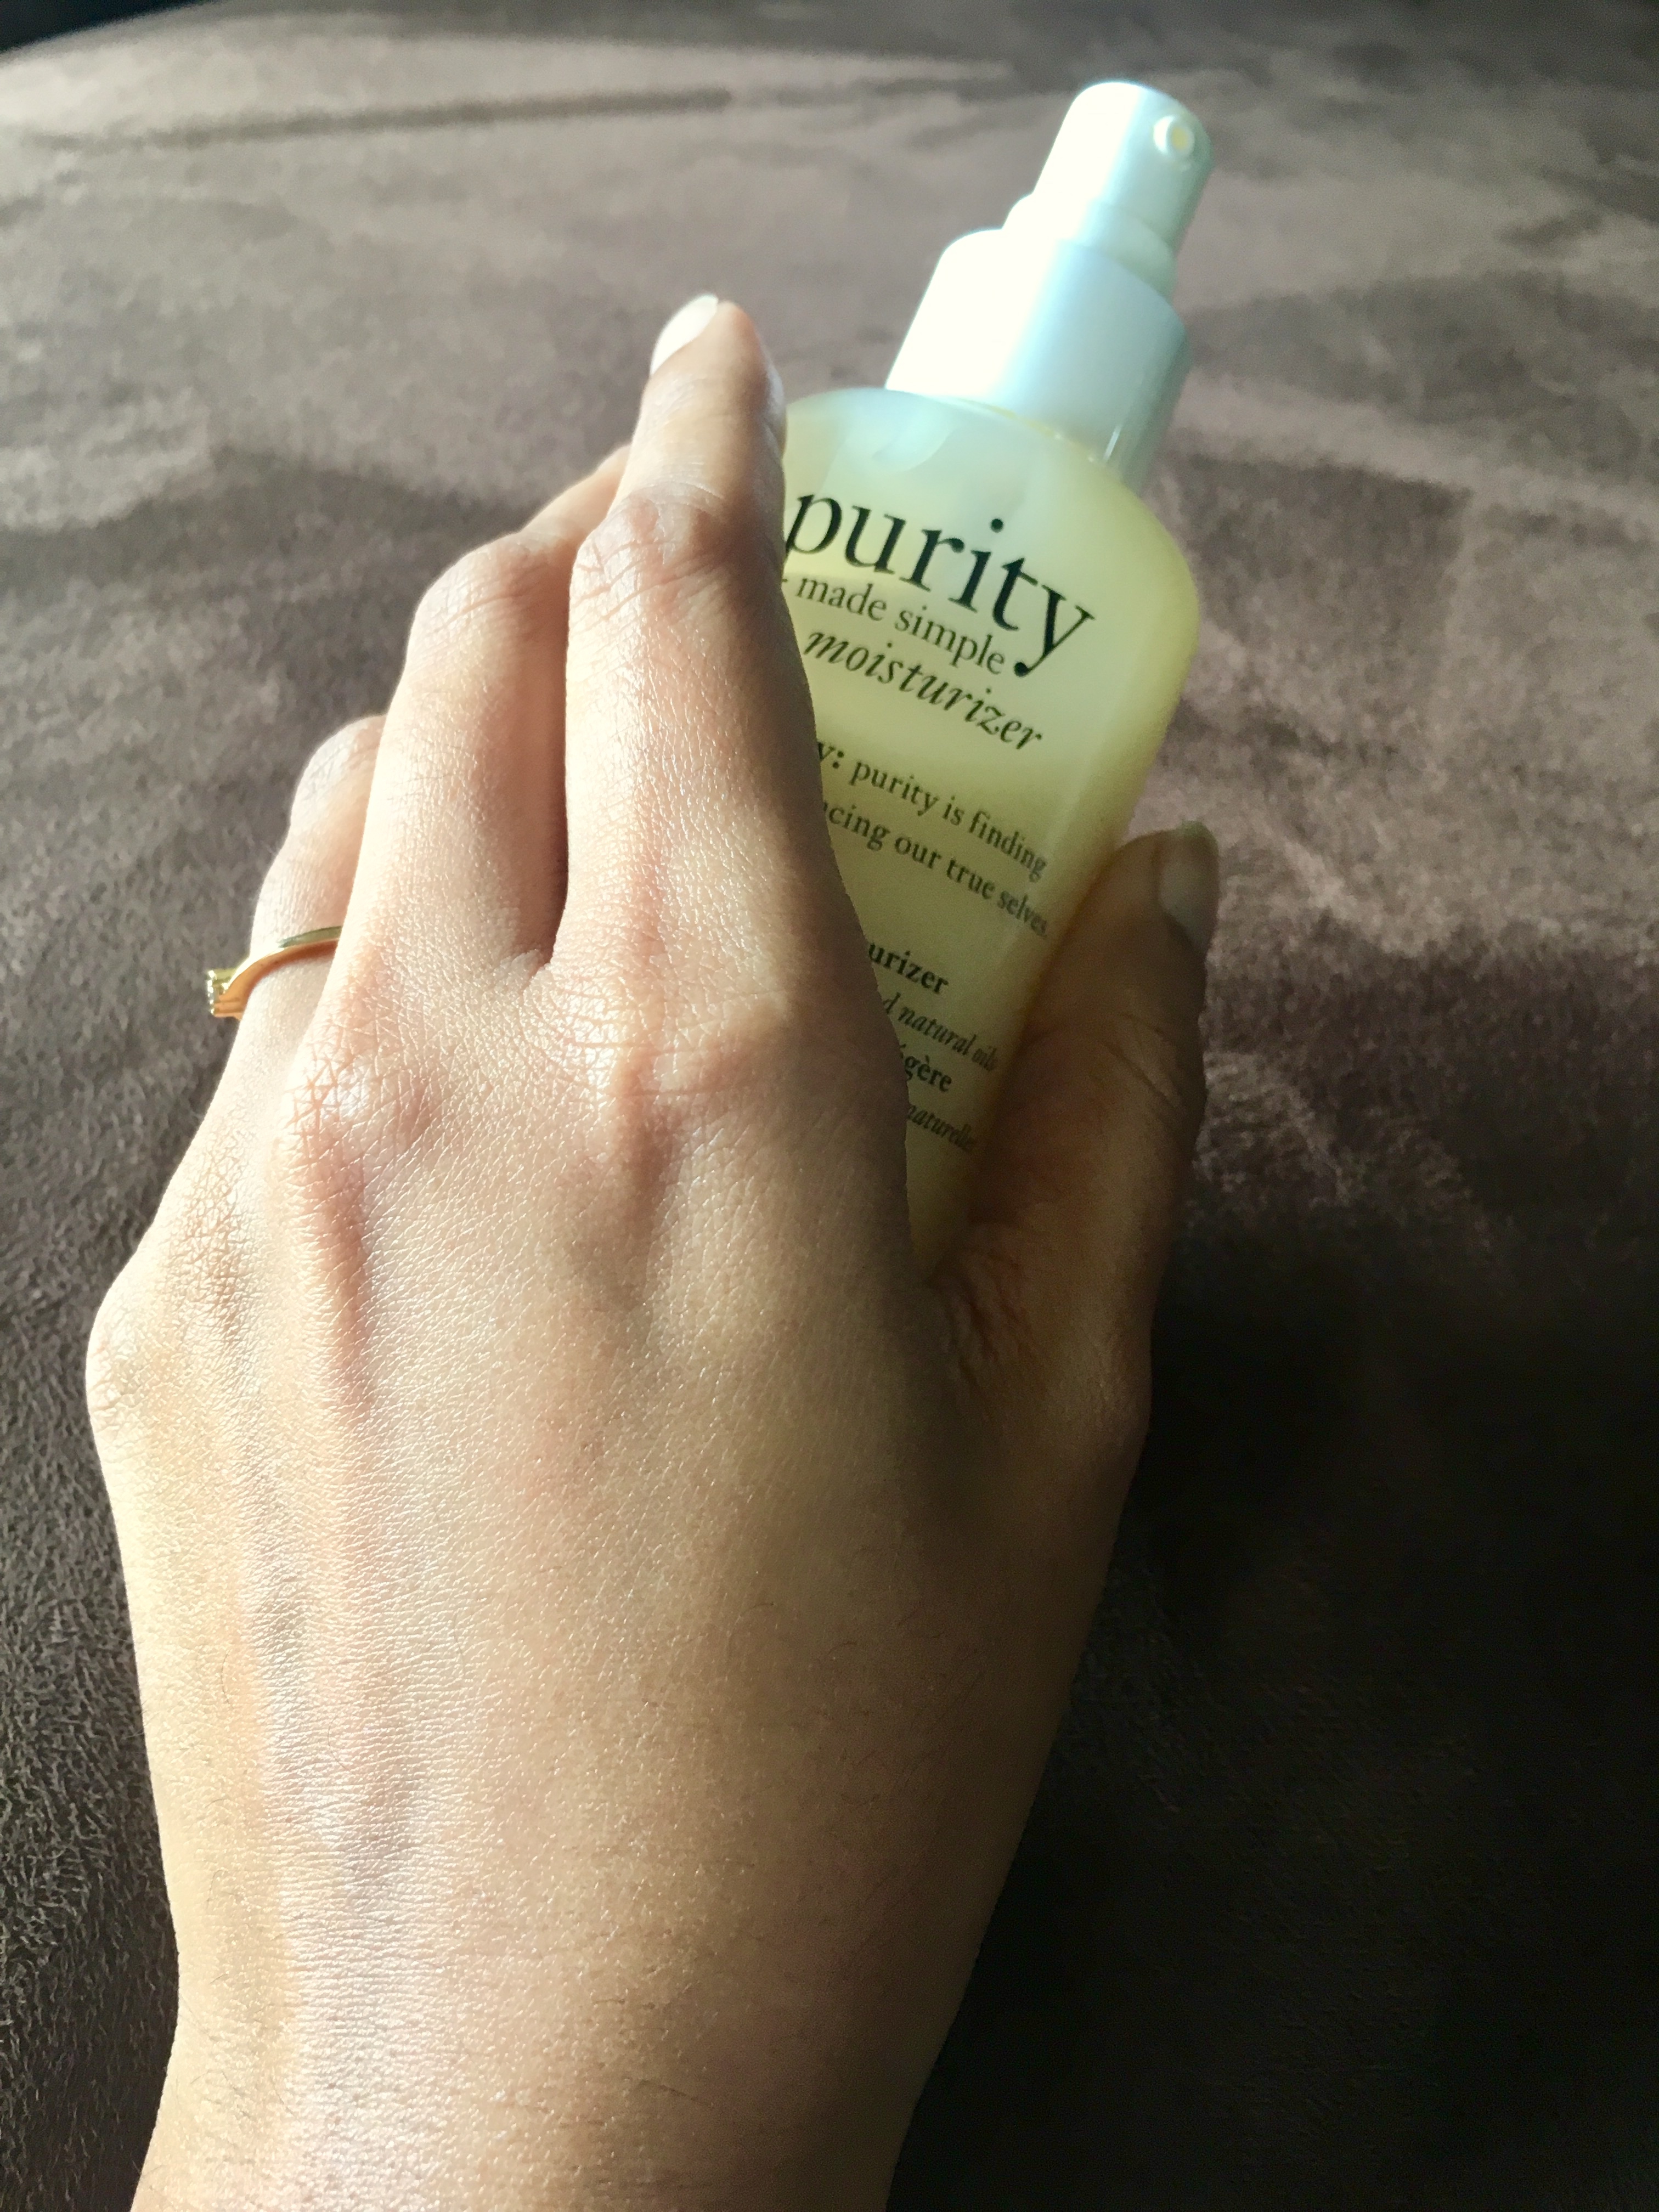 Philosophy Purity Made Simple Ultra-Light Moisturizer absorbed